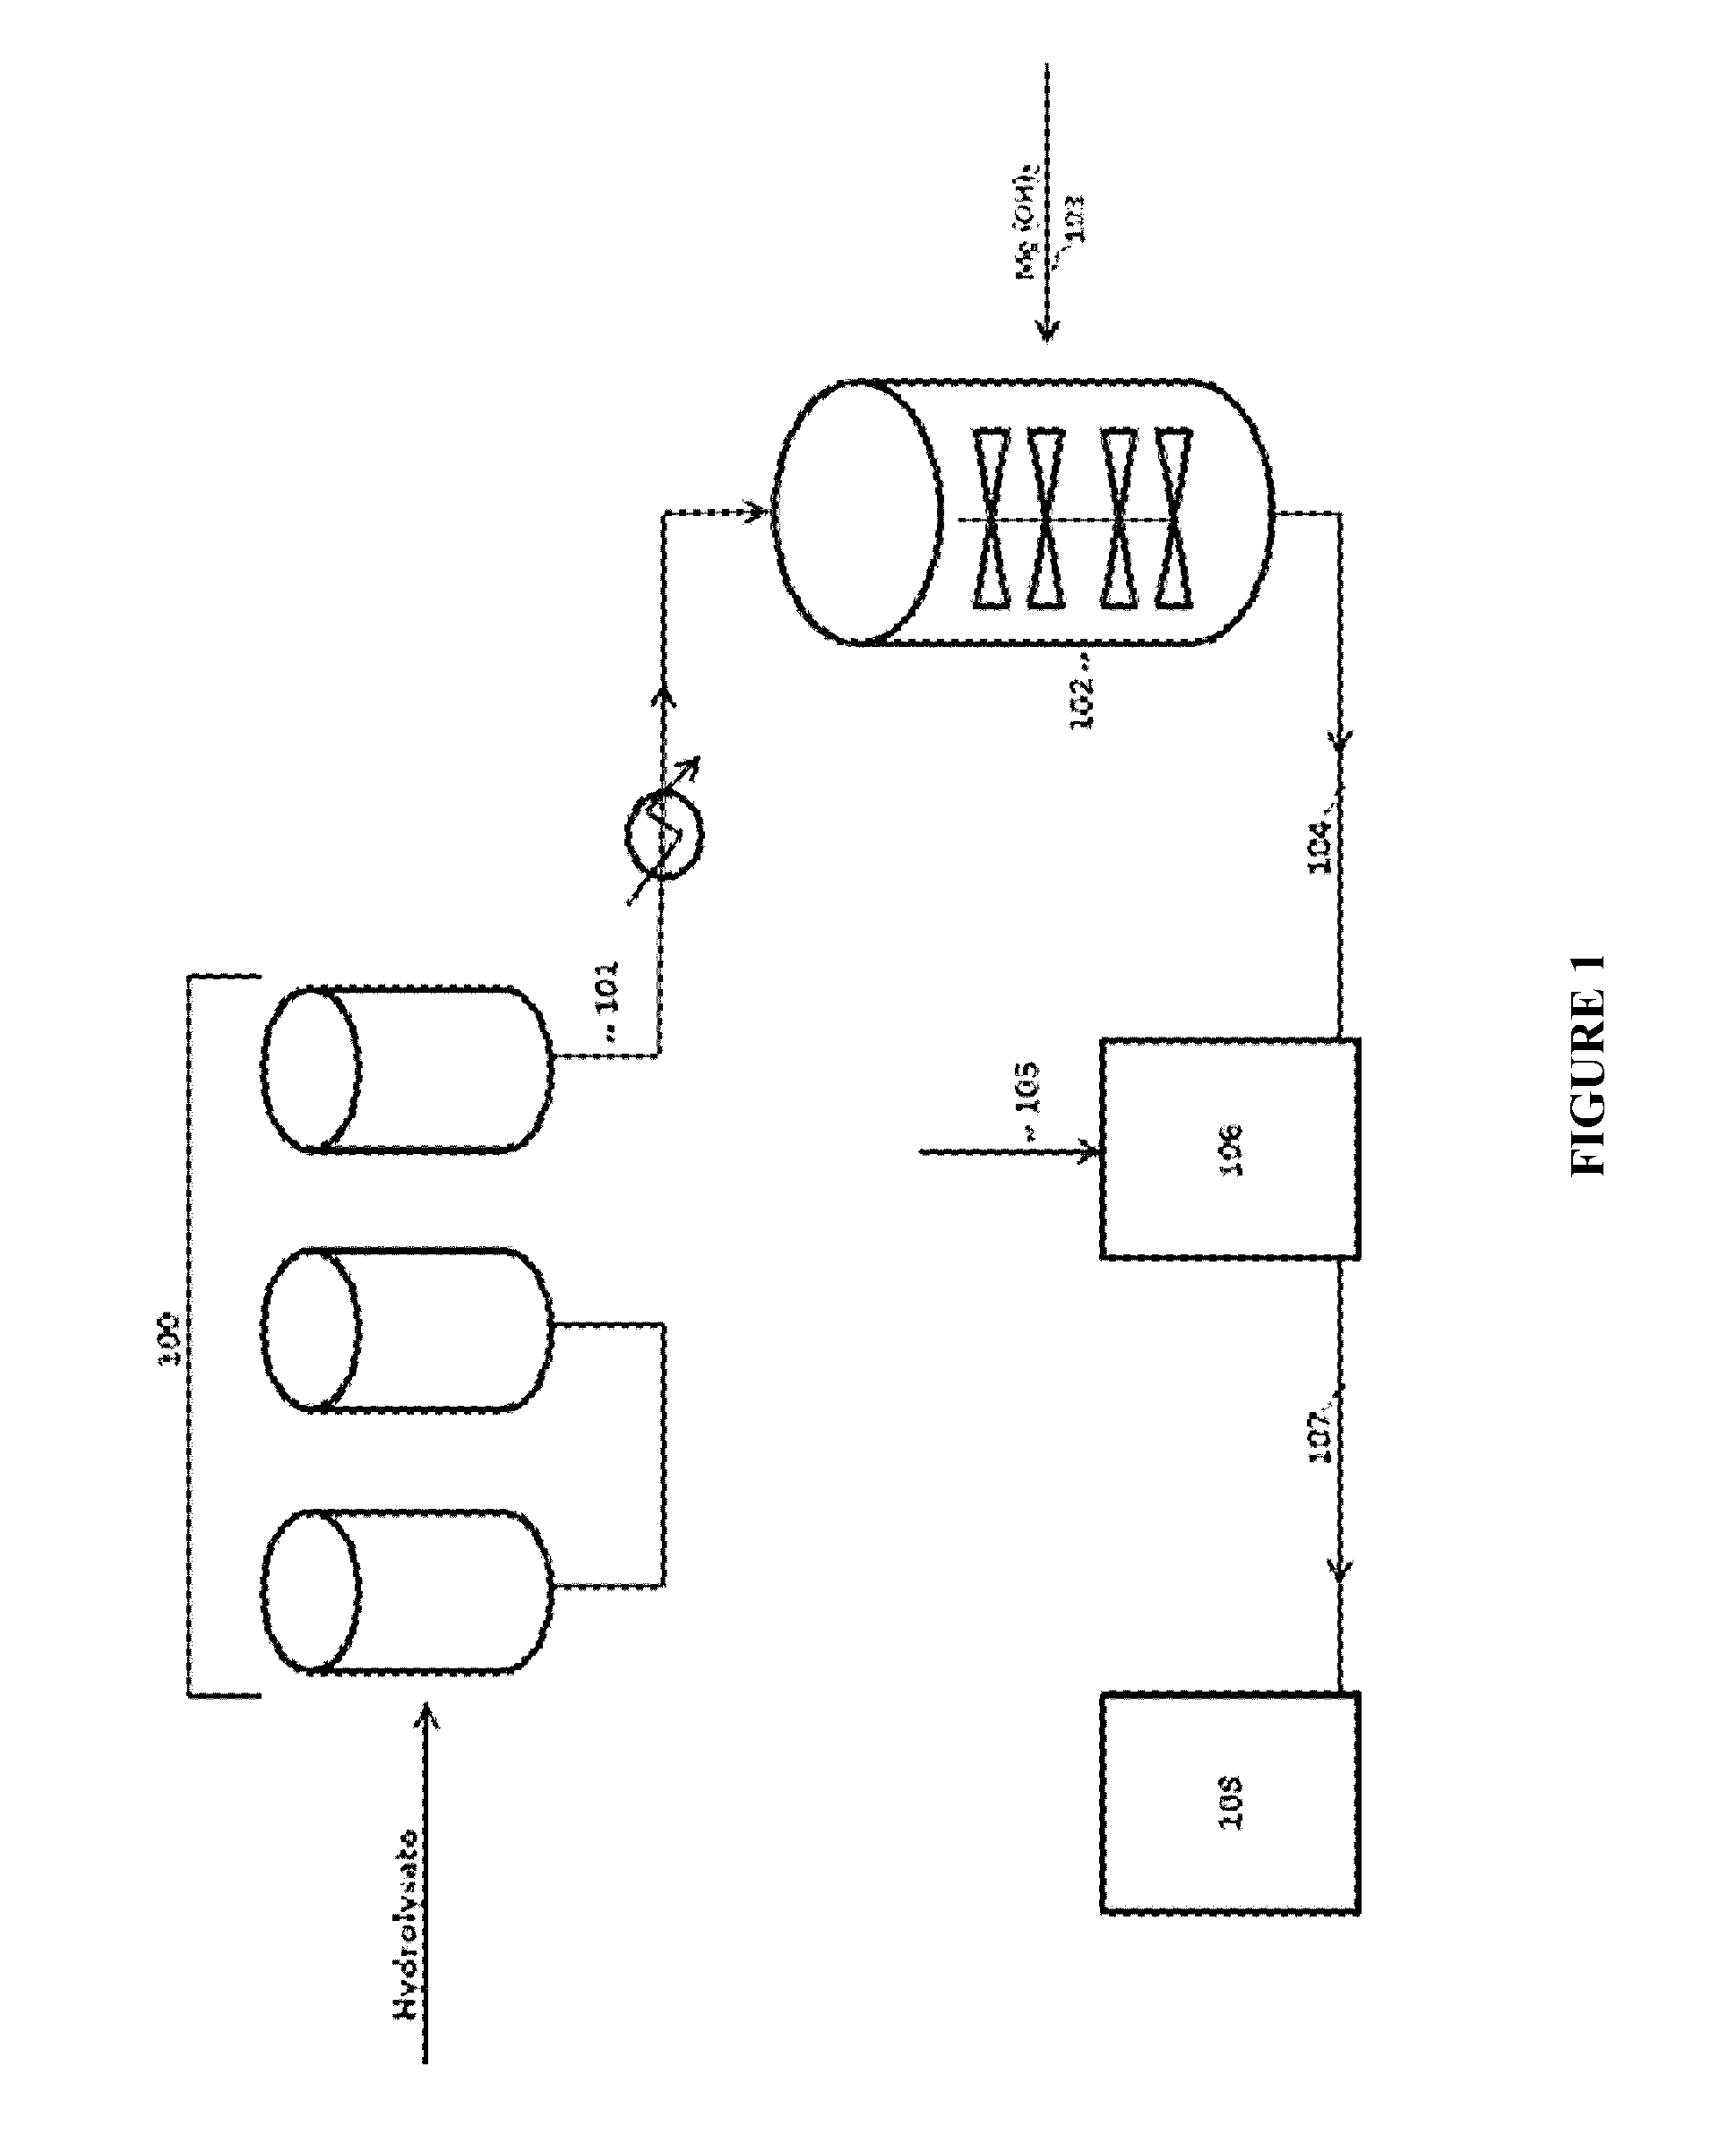 Methods for detoxifying a lignocellulosic hydrolysate